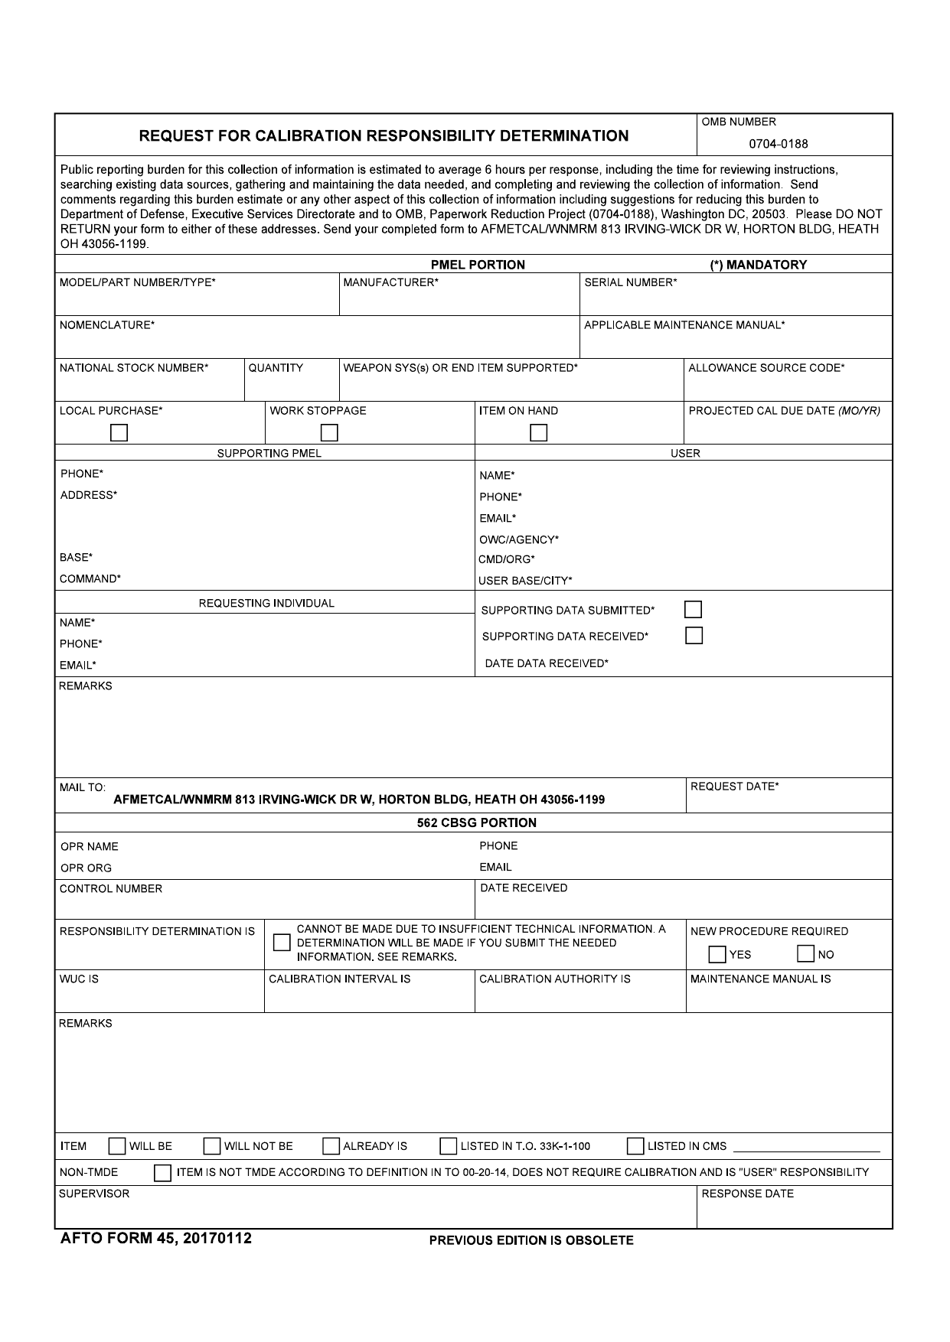 AFTO Form 45 Request for Calibration Responsibility Determination, Page 1